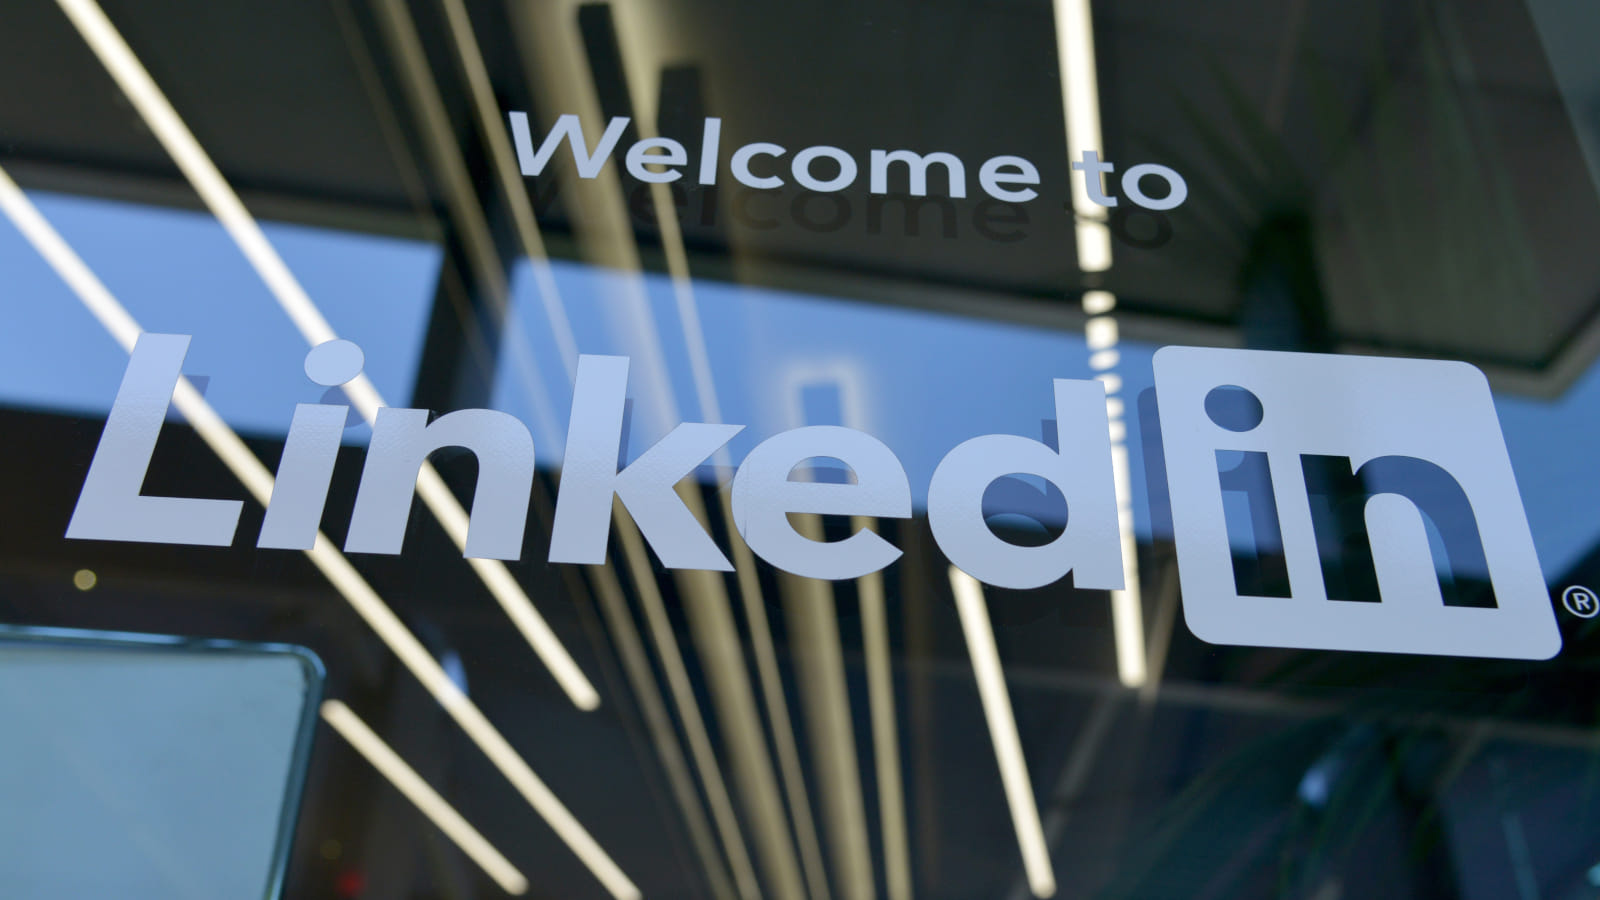 LinkedIn brand takes lead as most impersonated in phishing attacks